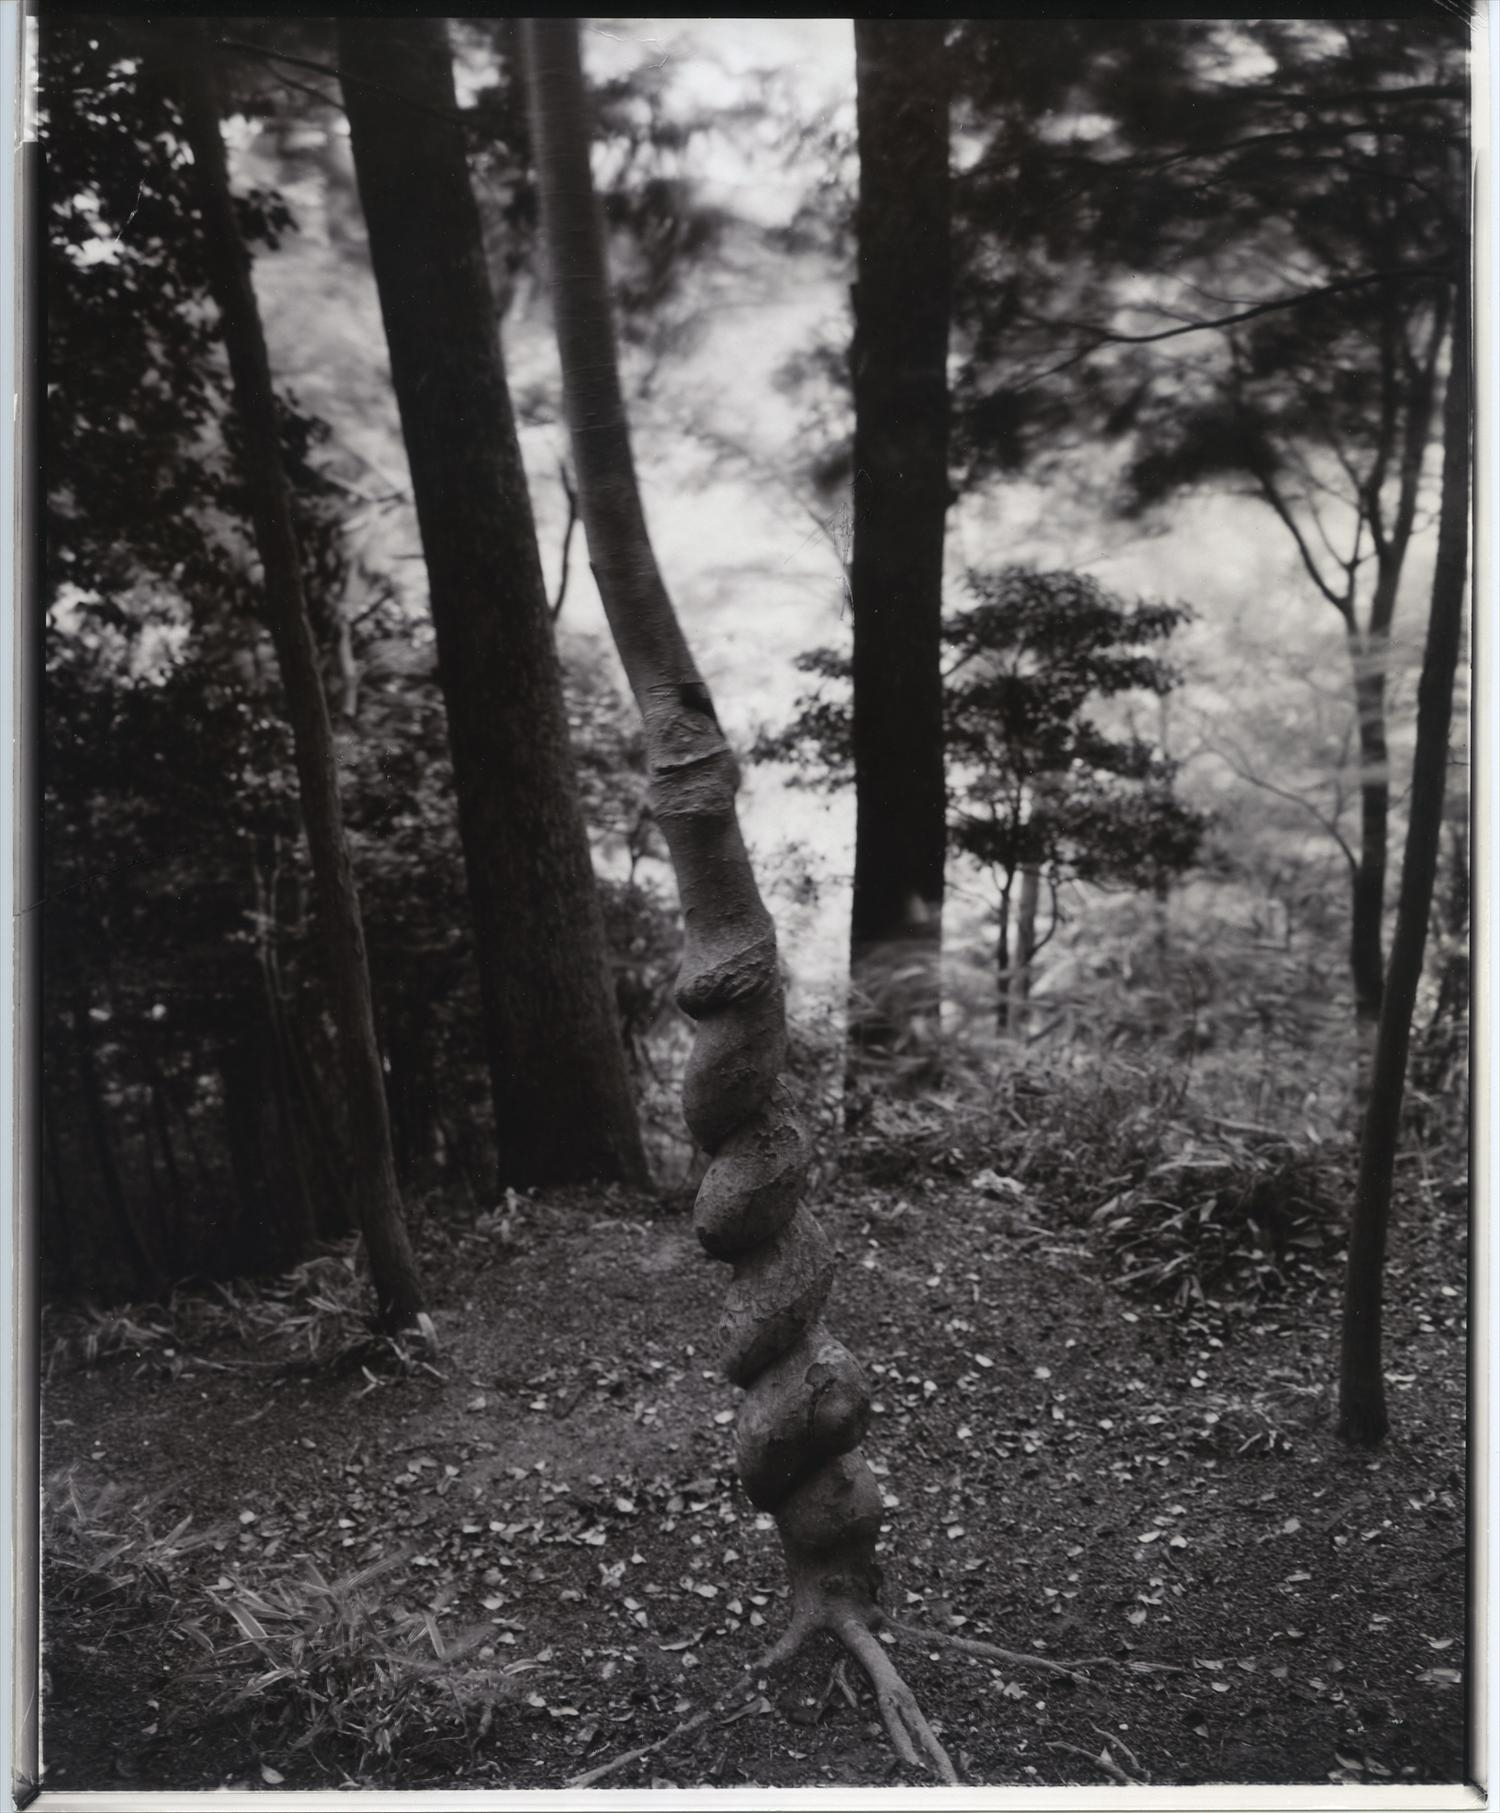 Tree, Japan by Linda Connor, 1988